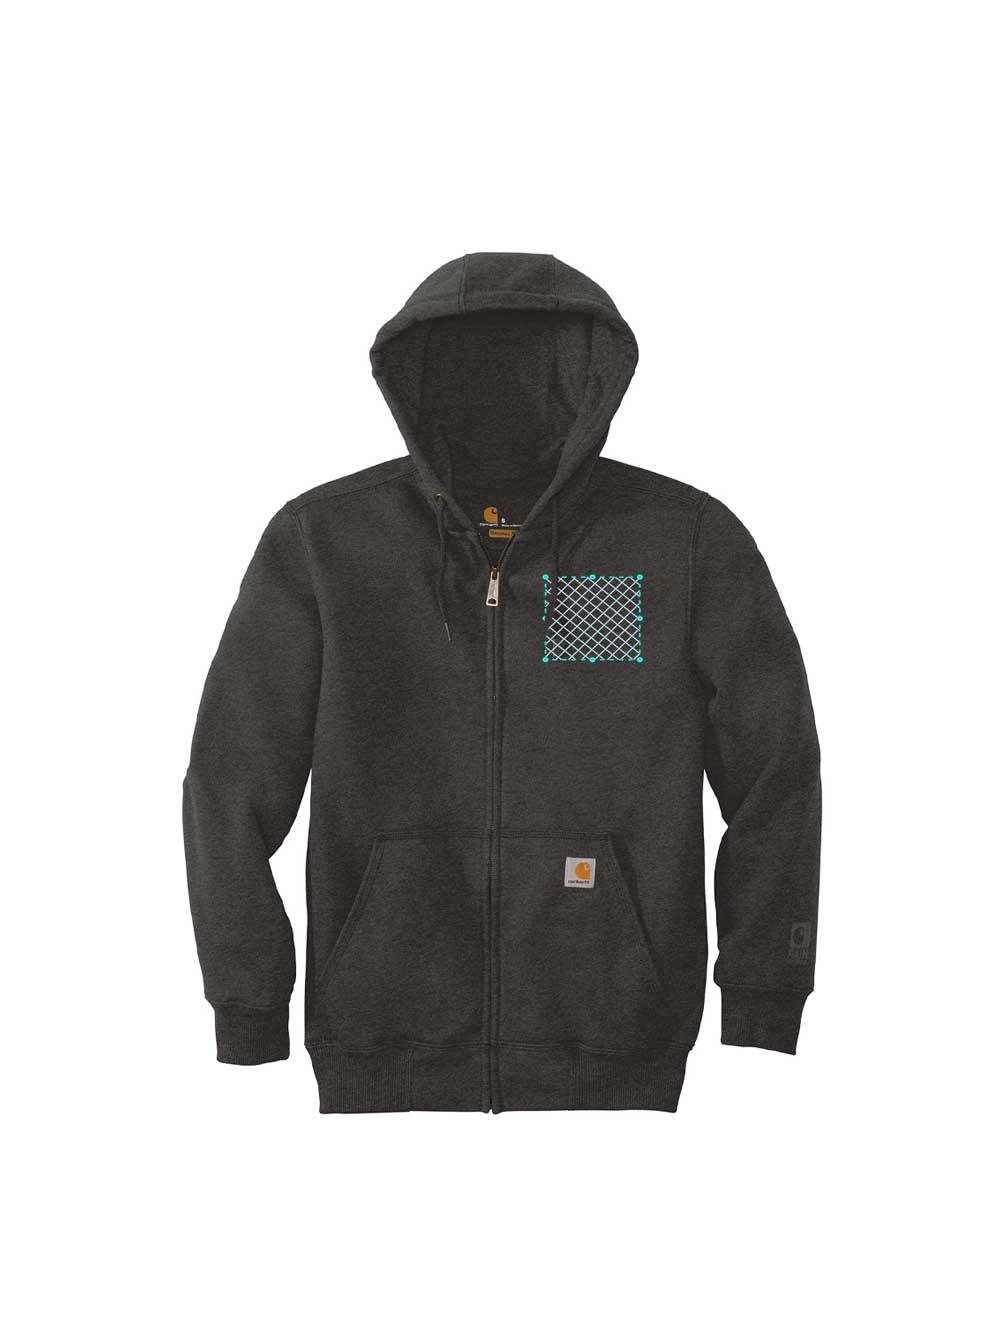 Embroidered Carhartt ® Rain Defender ® Paxton Heavyweight Hooded Zip-Front Sweatshirt - Constantly Create Shop